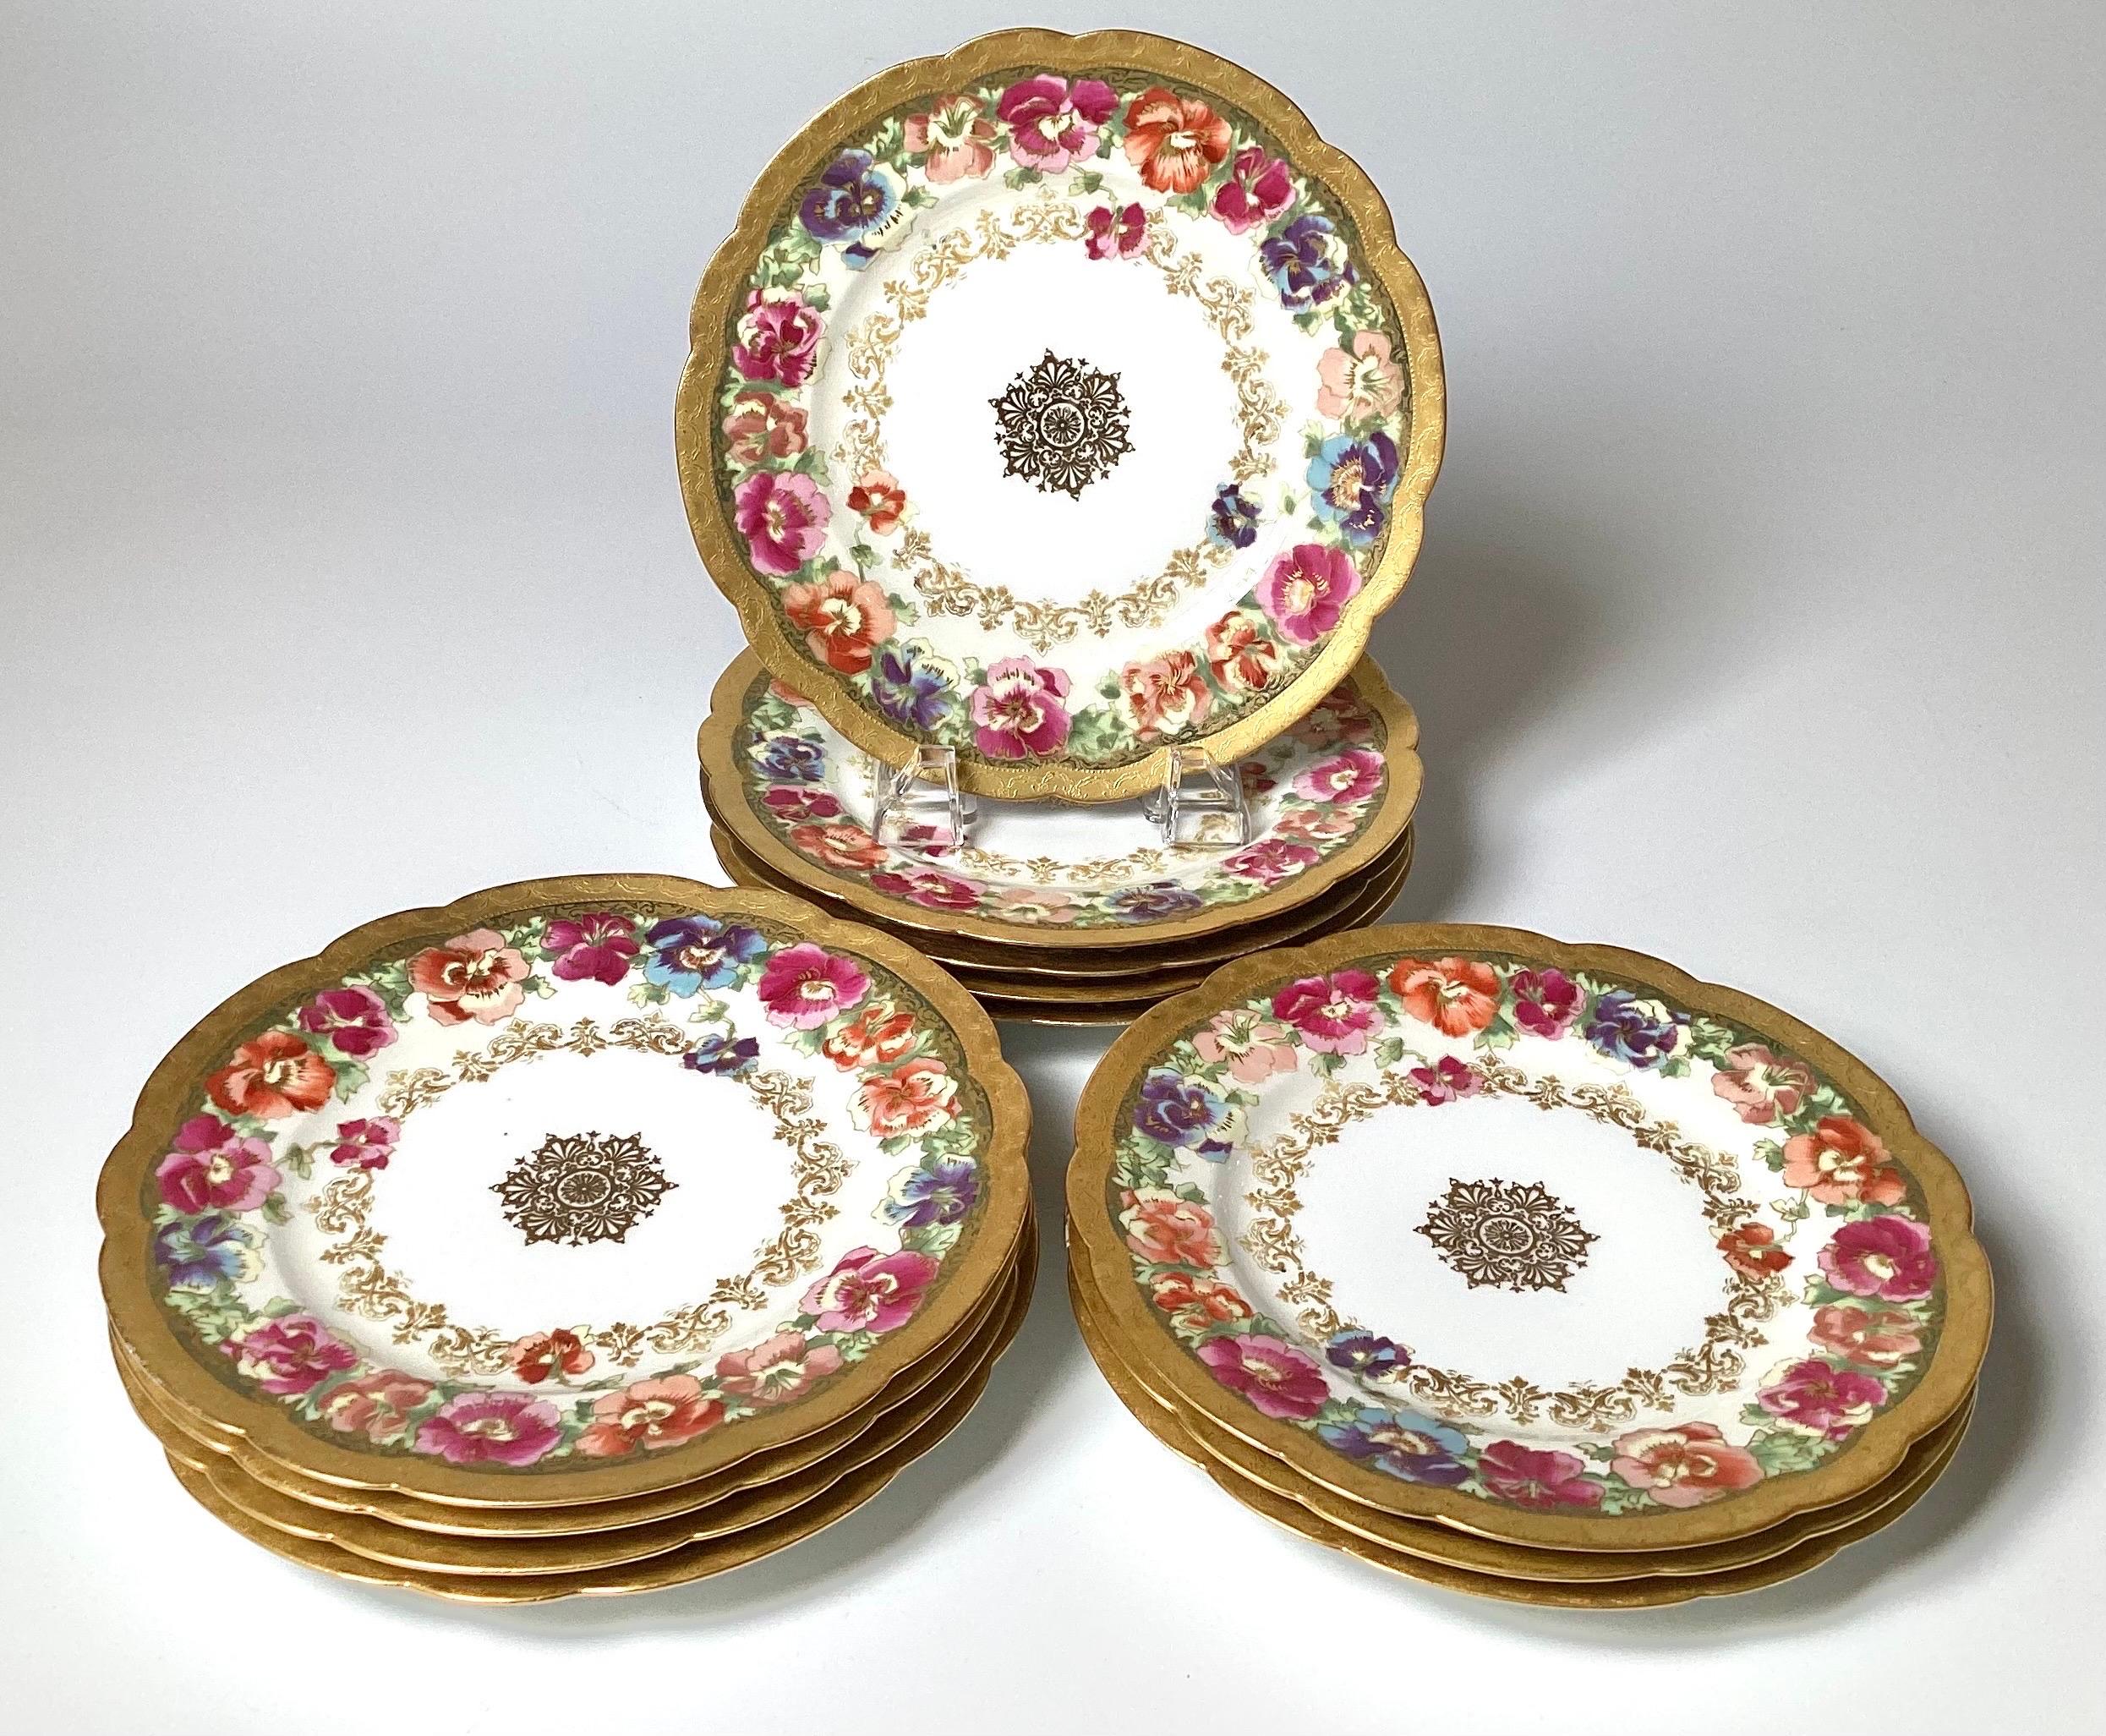 A set of 12 hand painted floral and gilt decorated luncheon accent plates, the 8.5 inches plates with elegant borders and center medallion, late 19th Century, marked Haviland Limoges France on the backs. These look incredible when paired with a